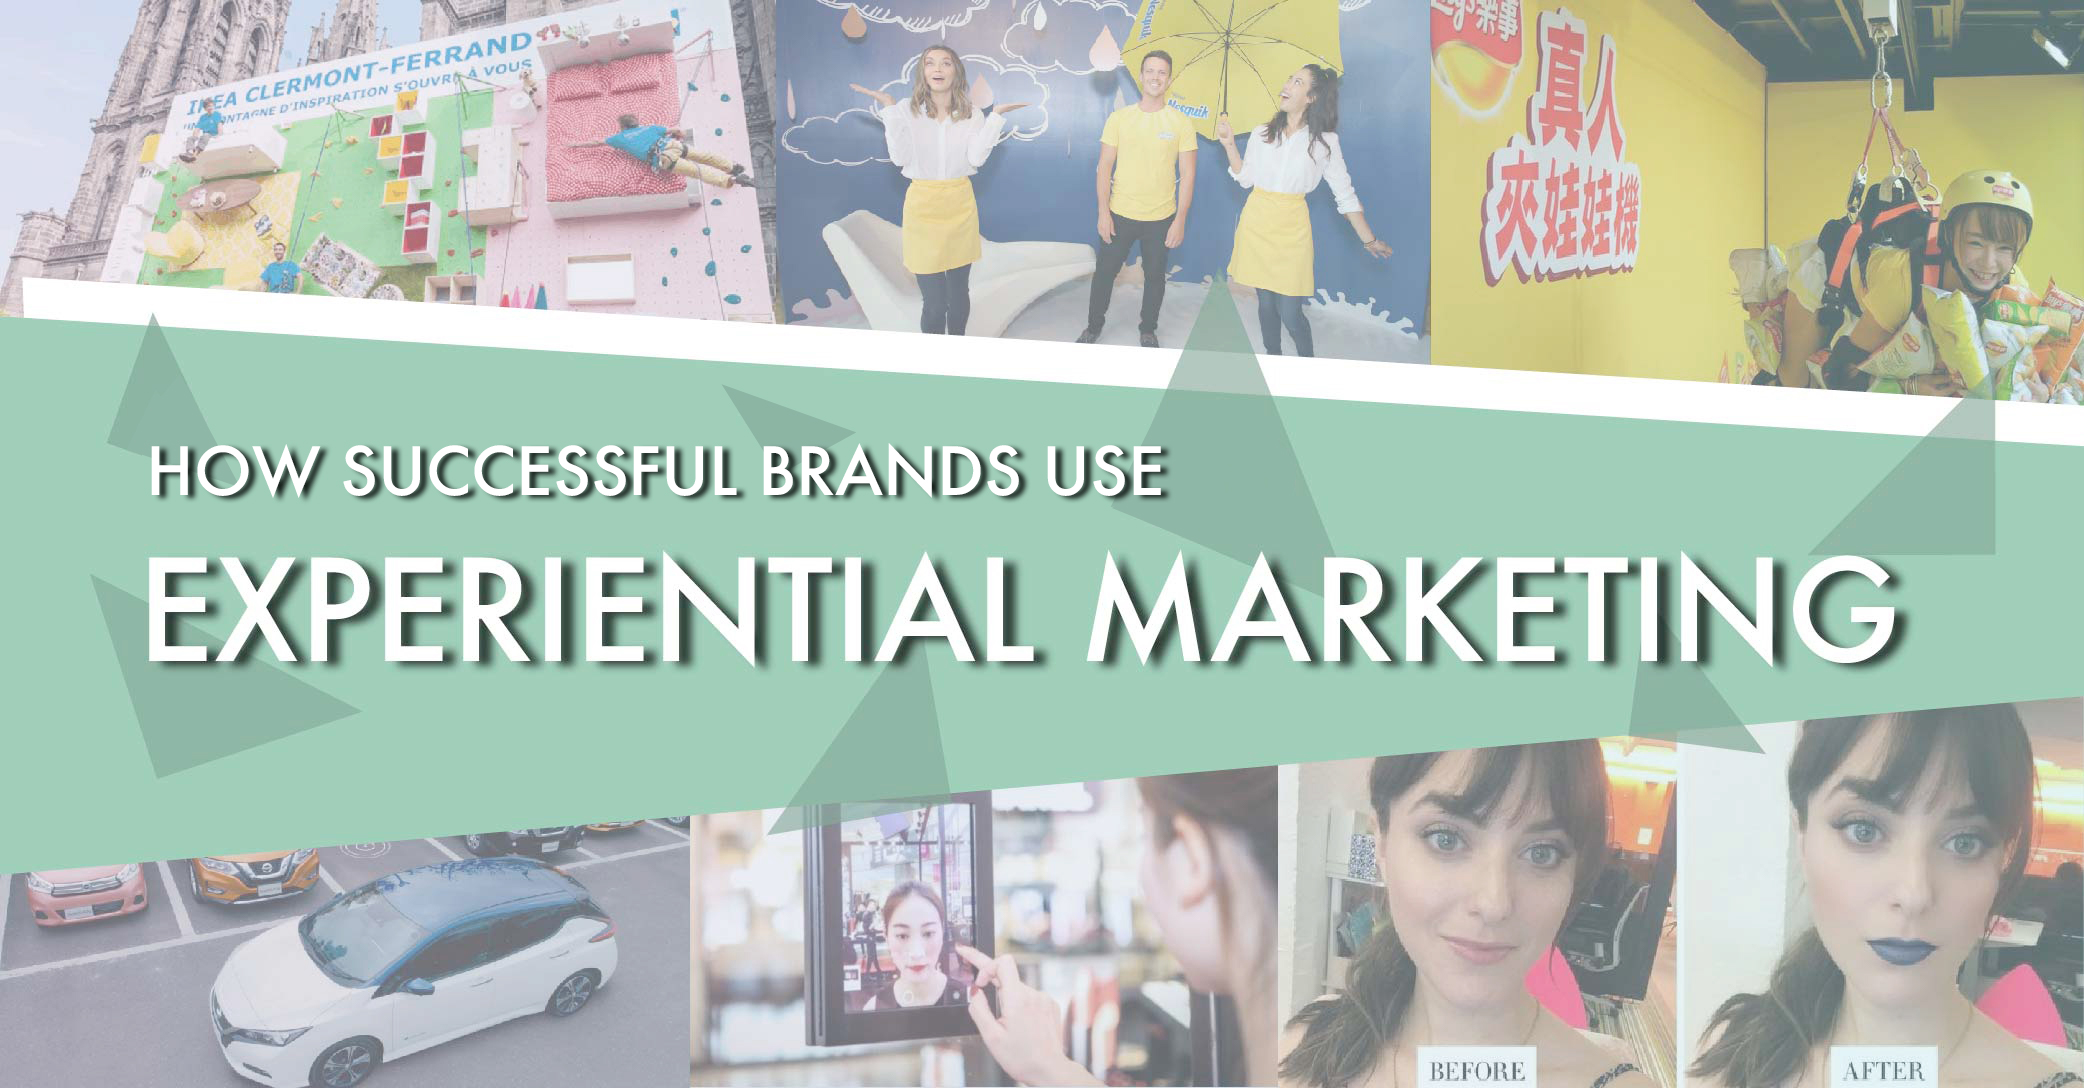 How successful brands use experiential marketing